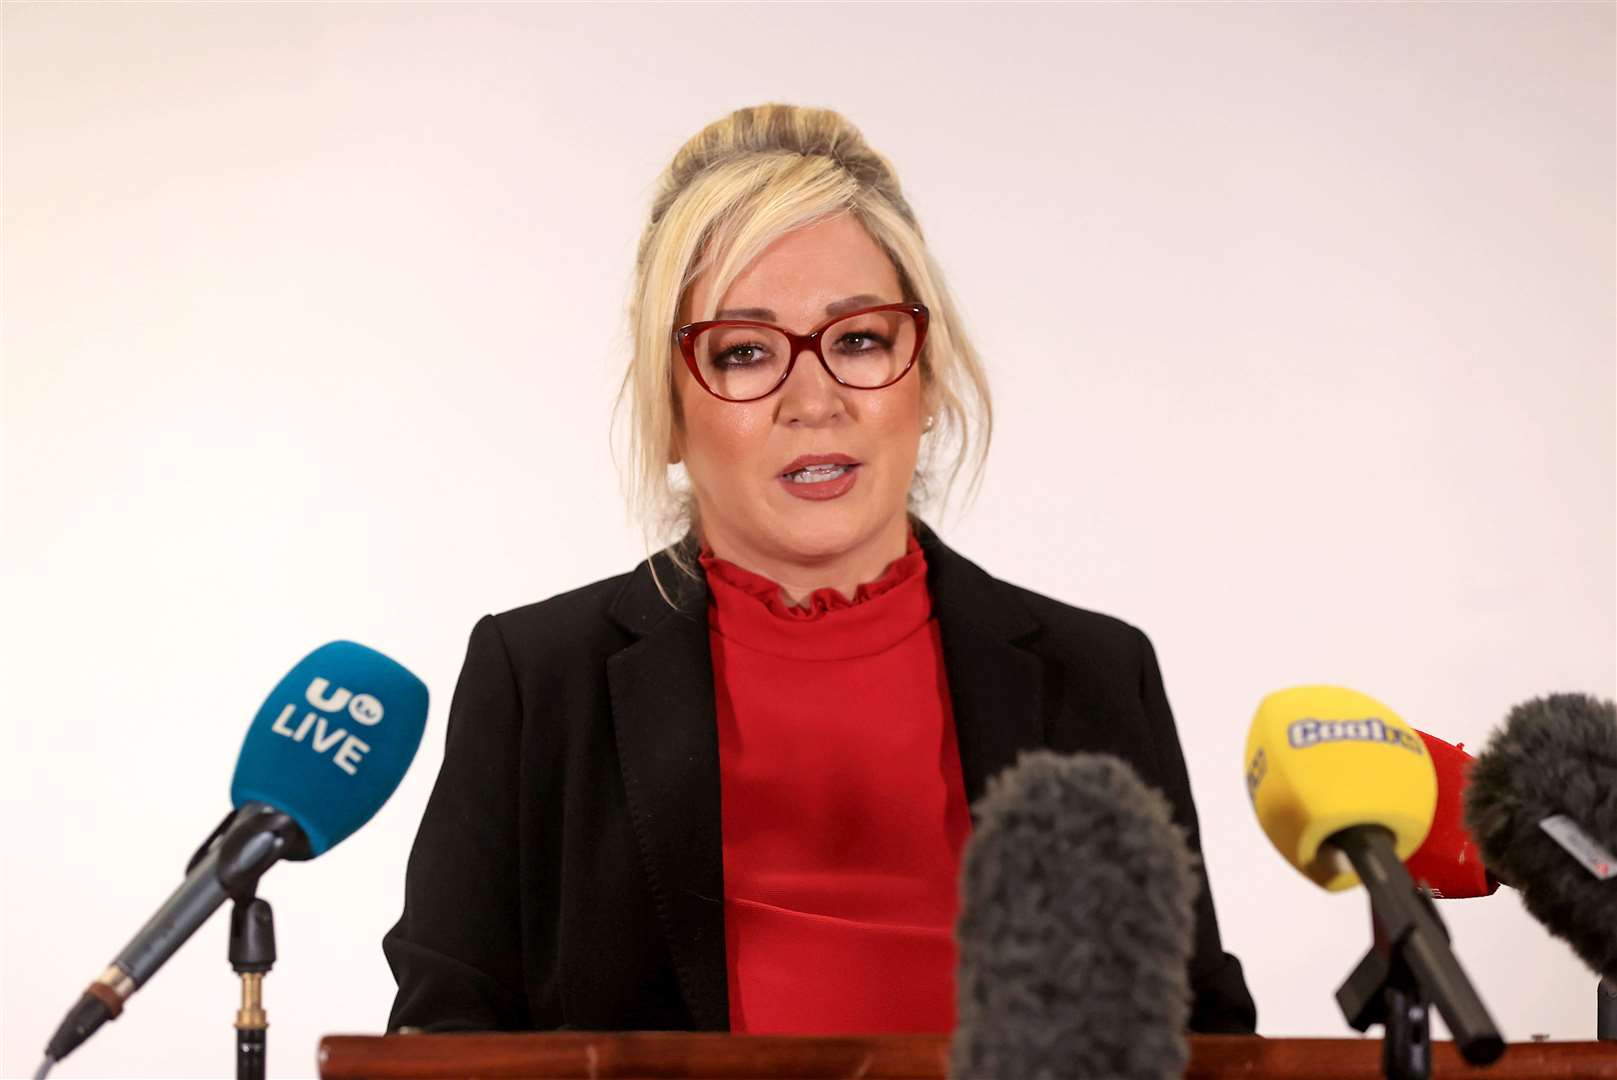 Michelle O’Neill said the hurt and suffering of the Troubles could not be disowned by republicans (Liam McBurney/PA).